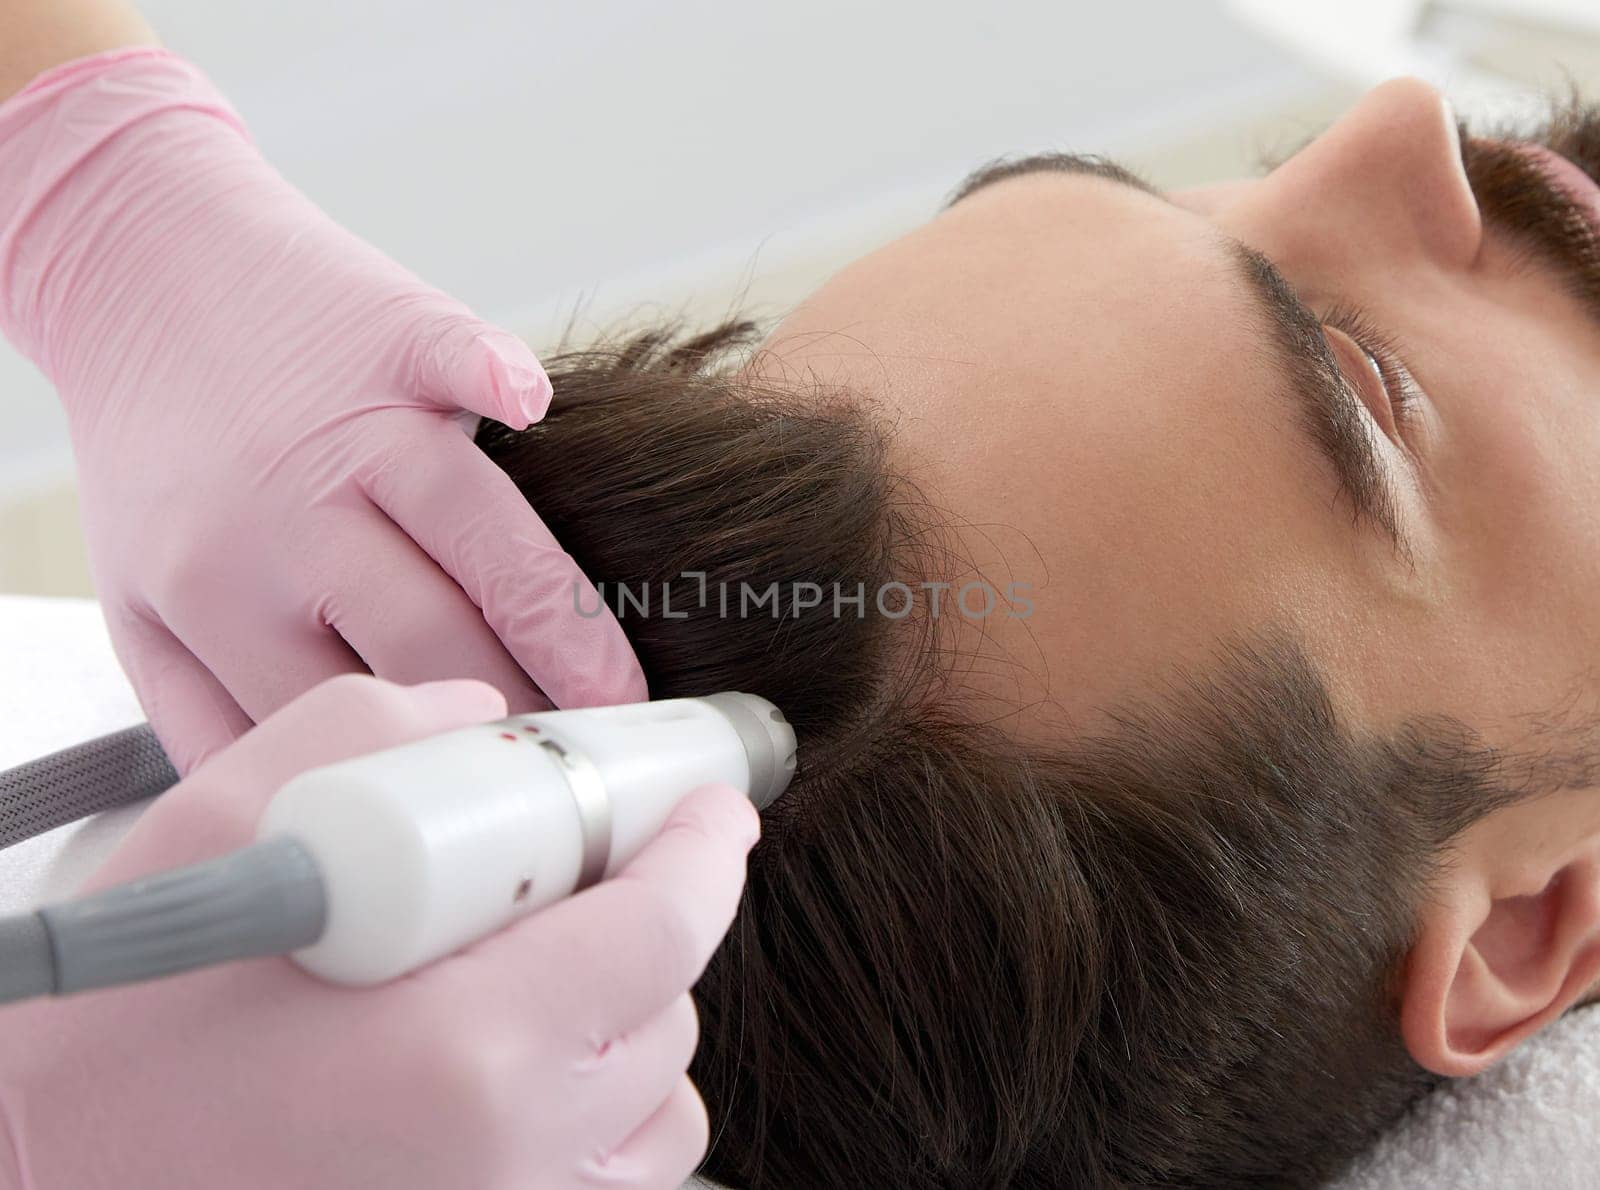 Doctor female dermatologist trichologist makes a procedure to stimulate hair growth on head of a man by Mariakray